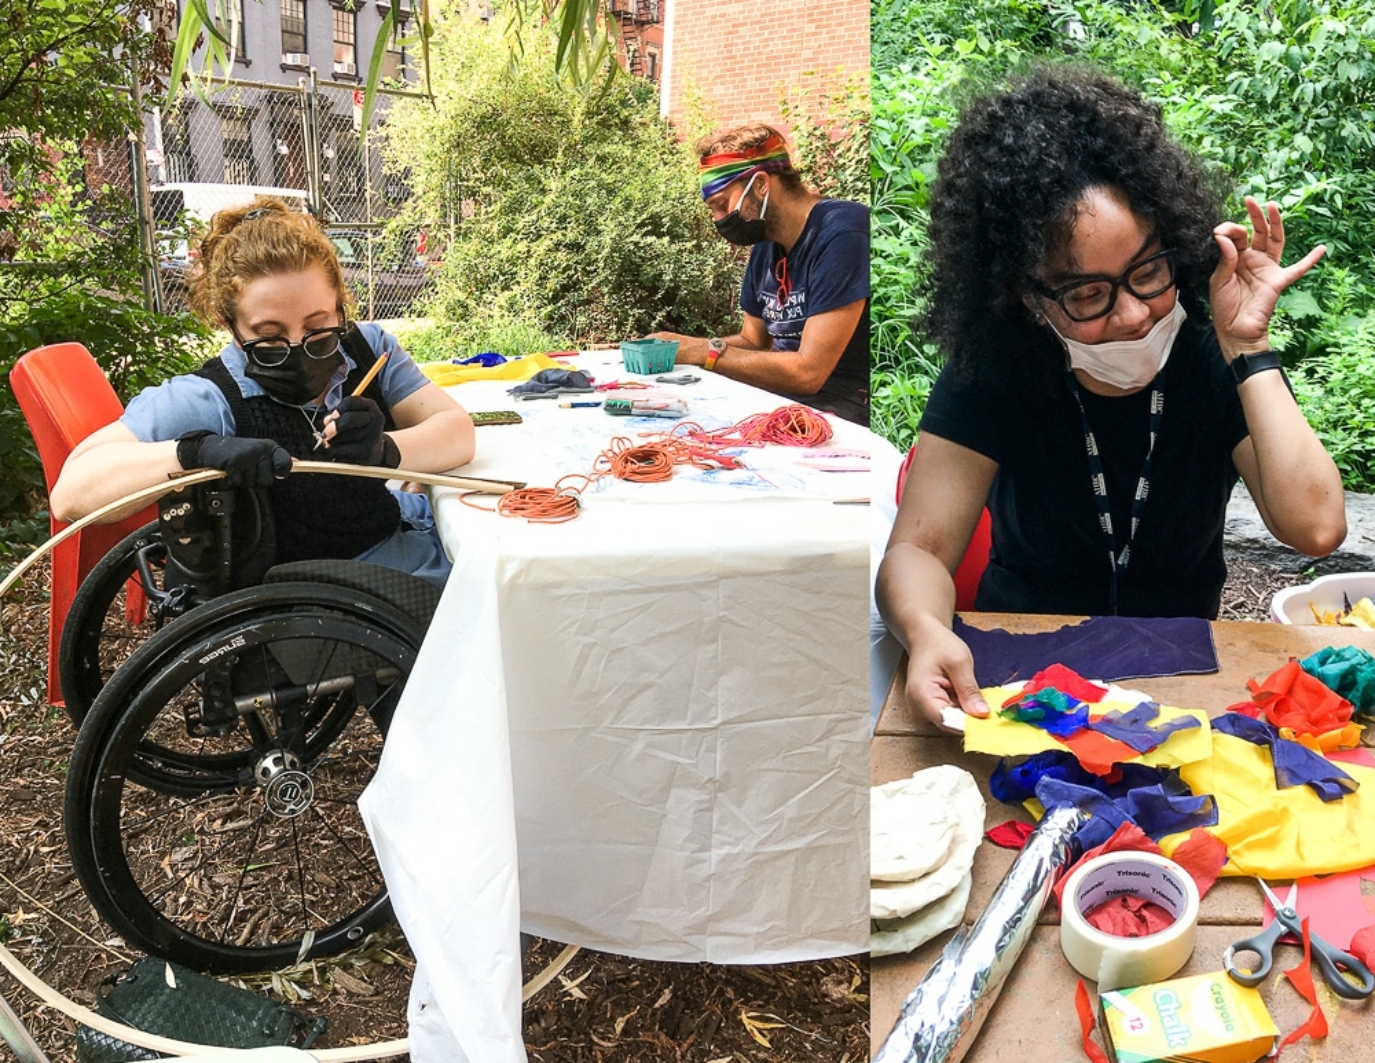 This is a split image of volunteers working. Left: A woman in a wheelchair leans to the right and is writing something on an arc of bamboo. They share a table with another person to the right. Right image: One person is seated at a table, masked but clearly enjoying themself, with multicolored fabrics spread out across the table.